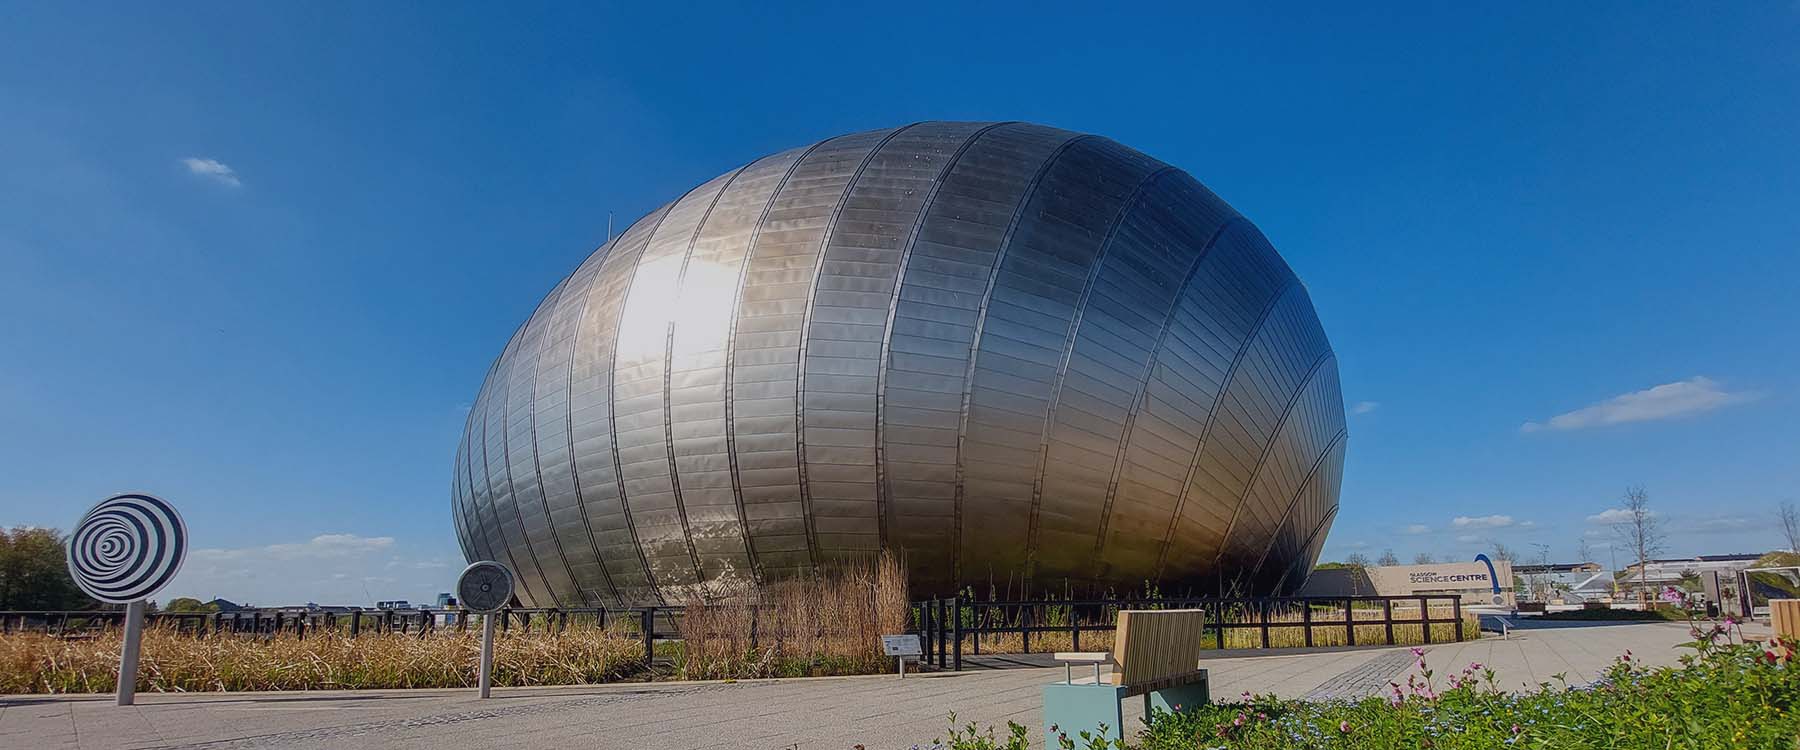 The IMAX building at Glasgow Science Centre